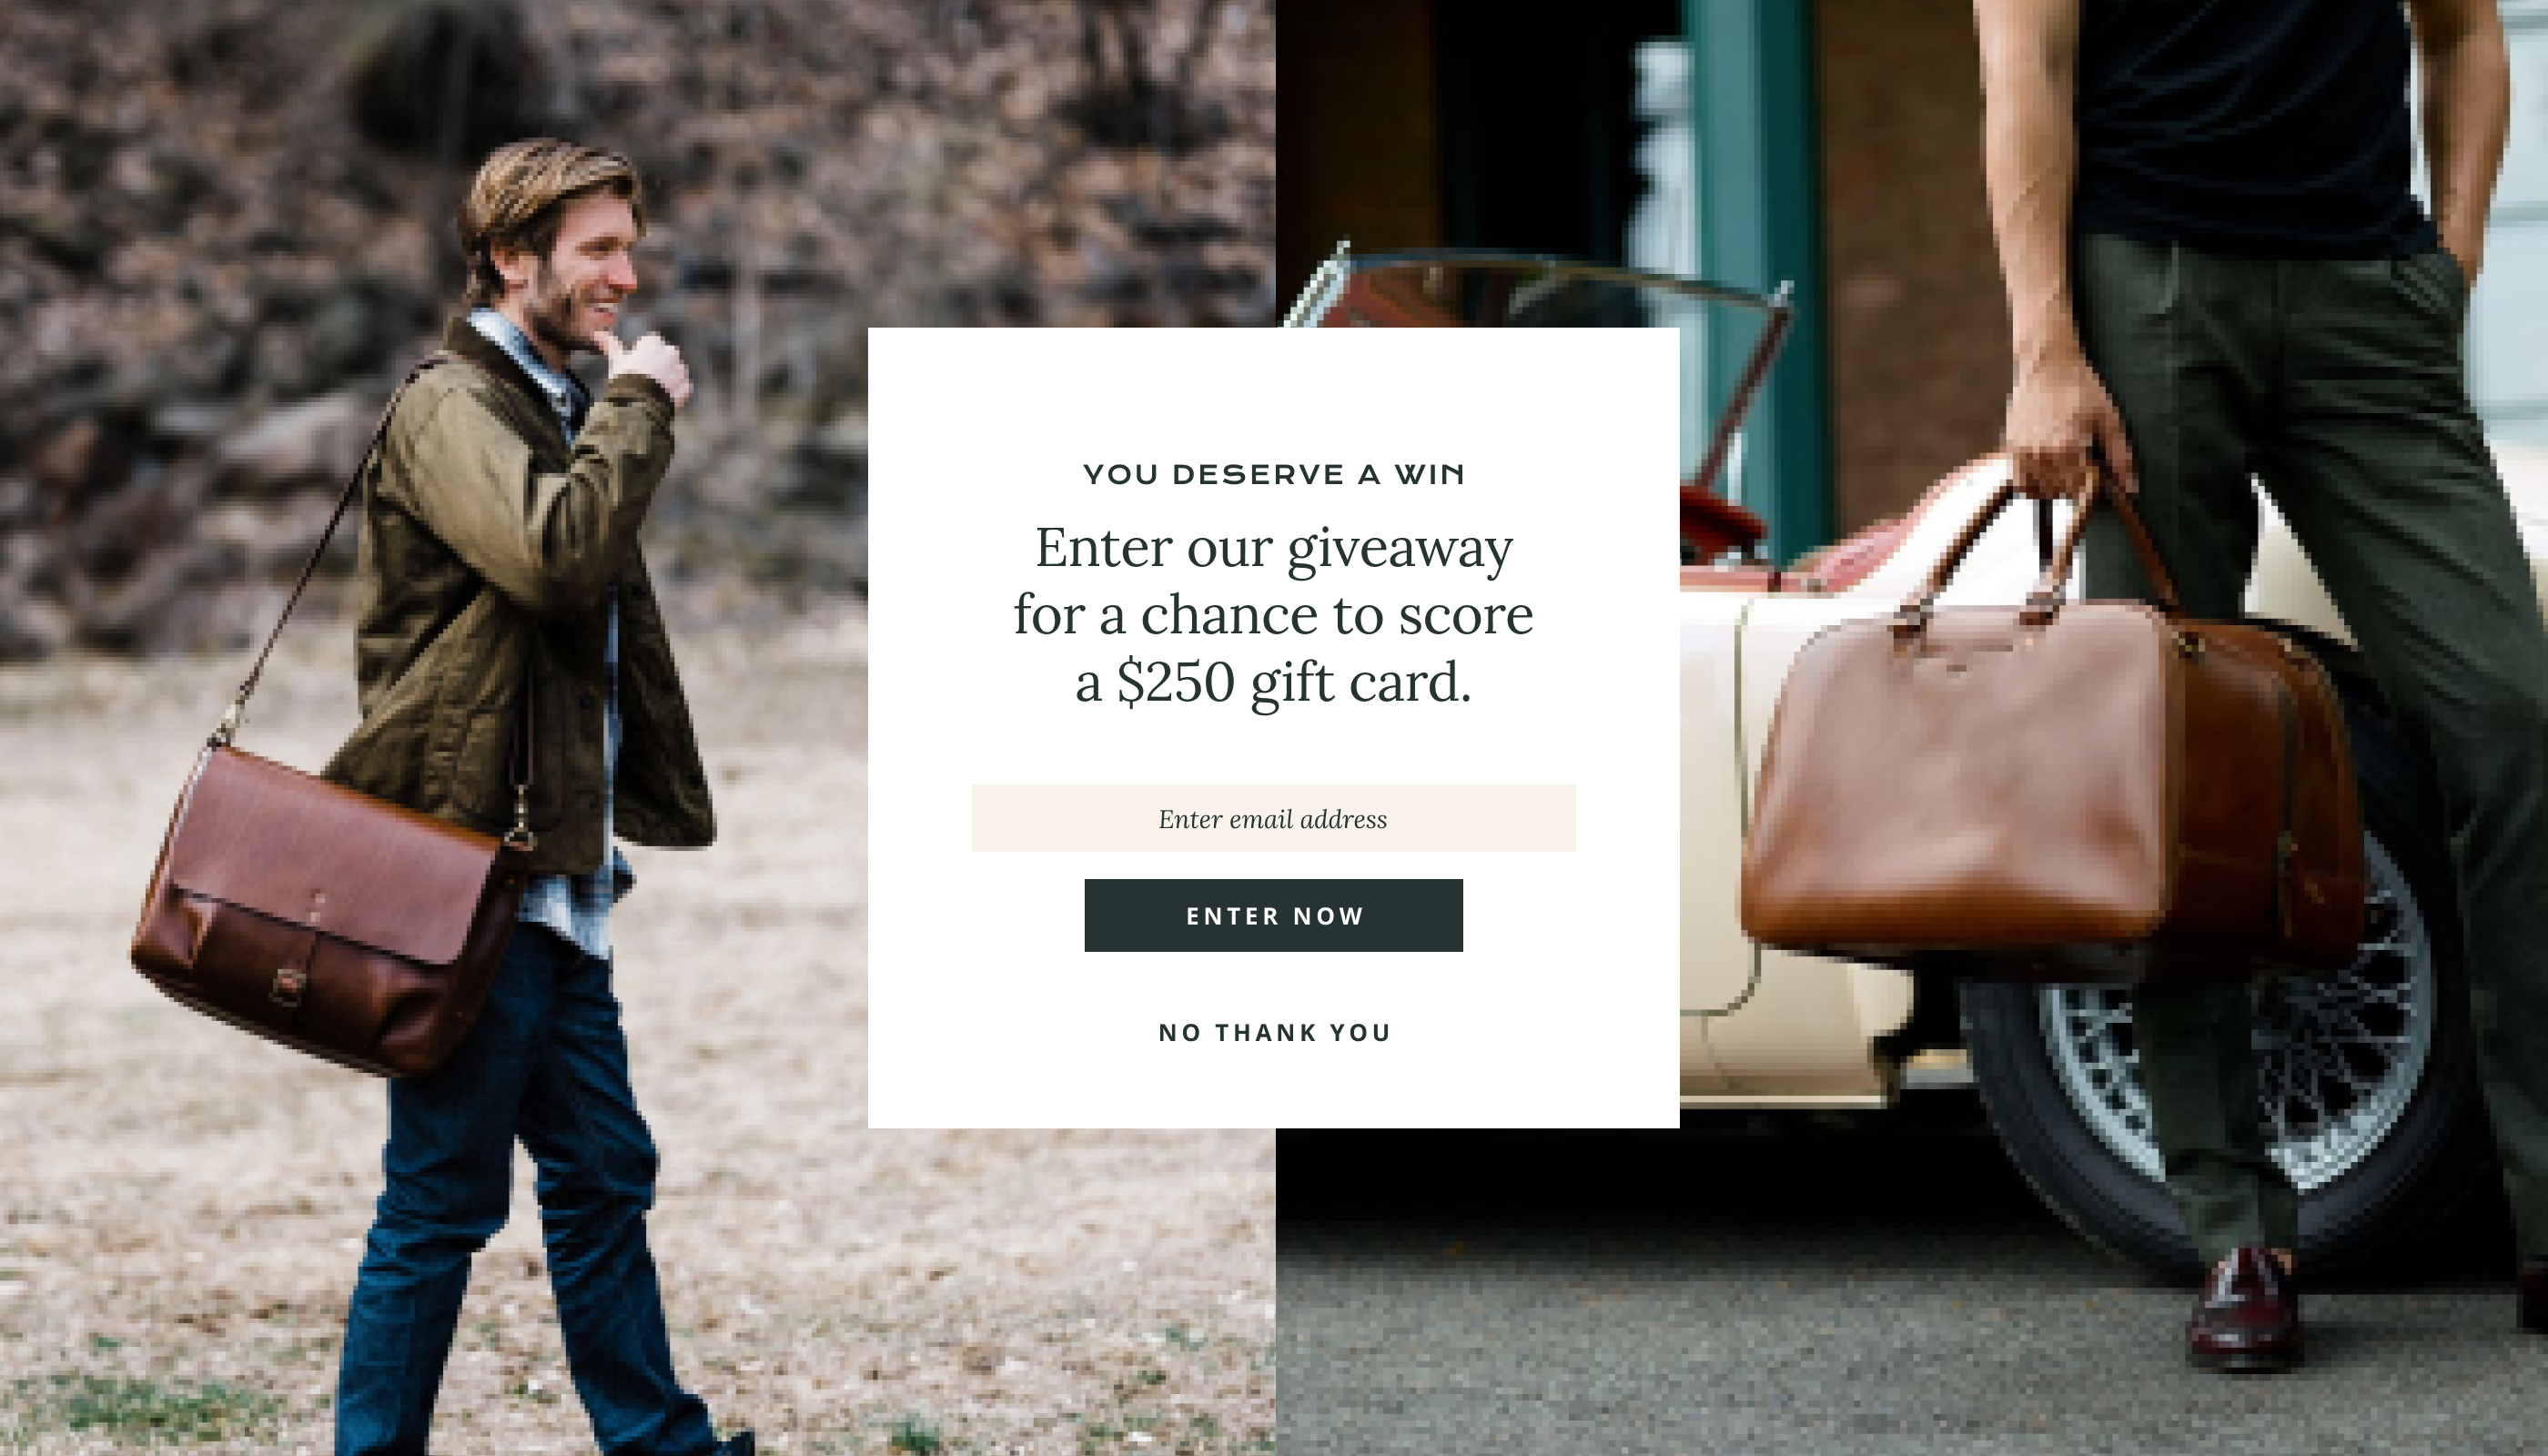 Pop-up from Satchel & Page that asks customers if they want to enter their giveaway. In order to enter, the customer has to leave their email address.